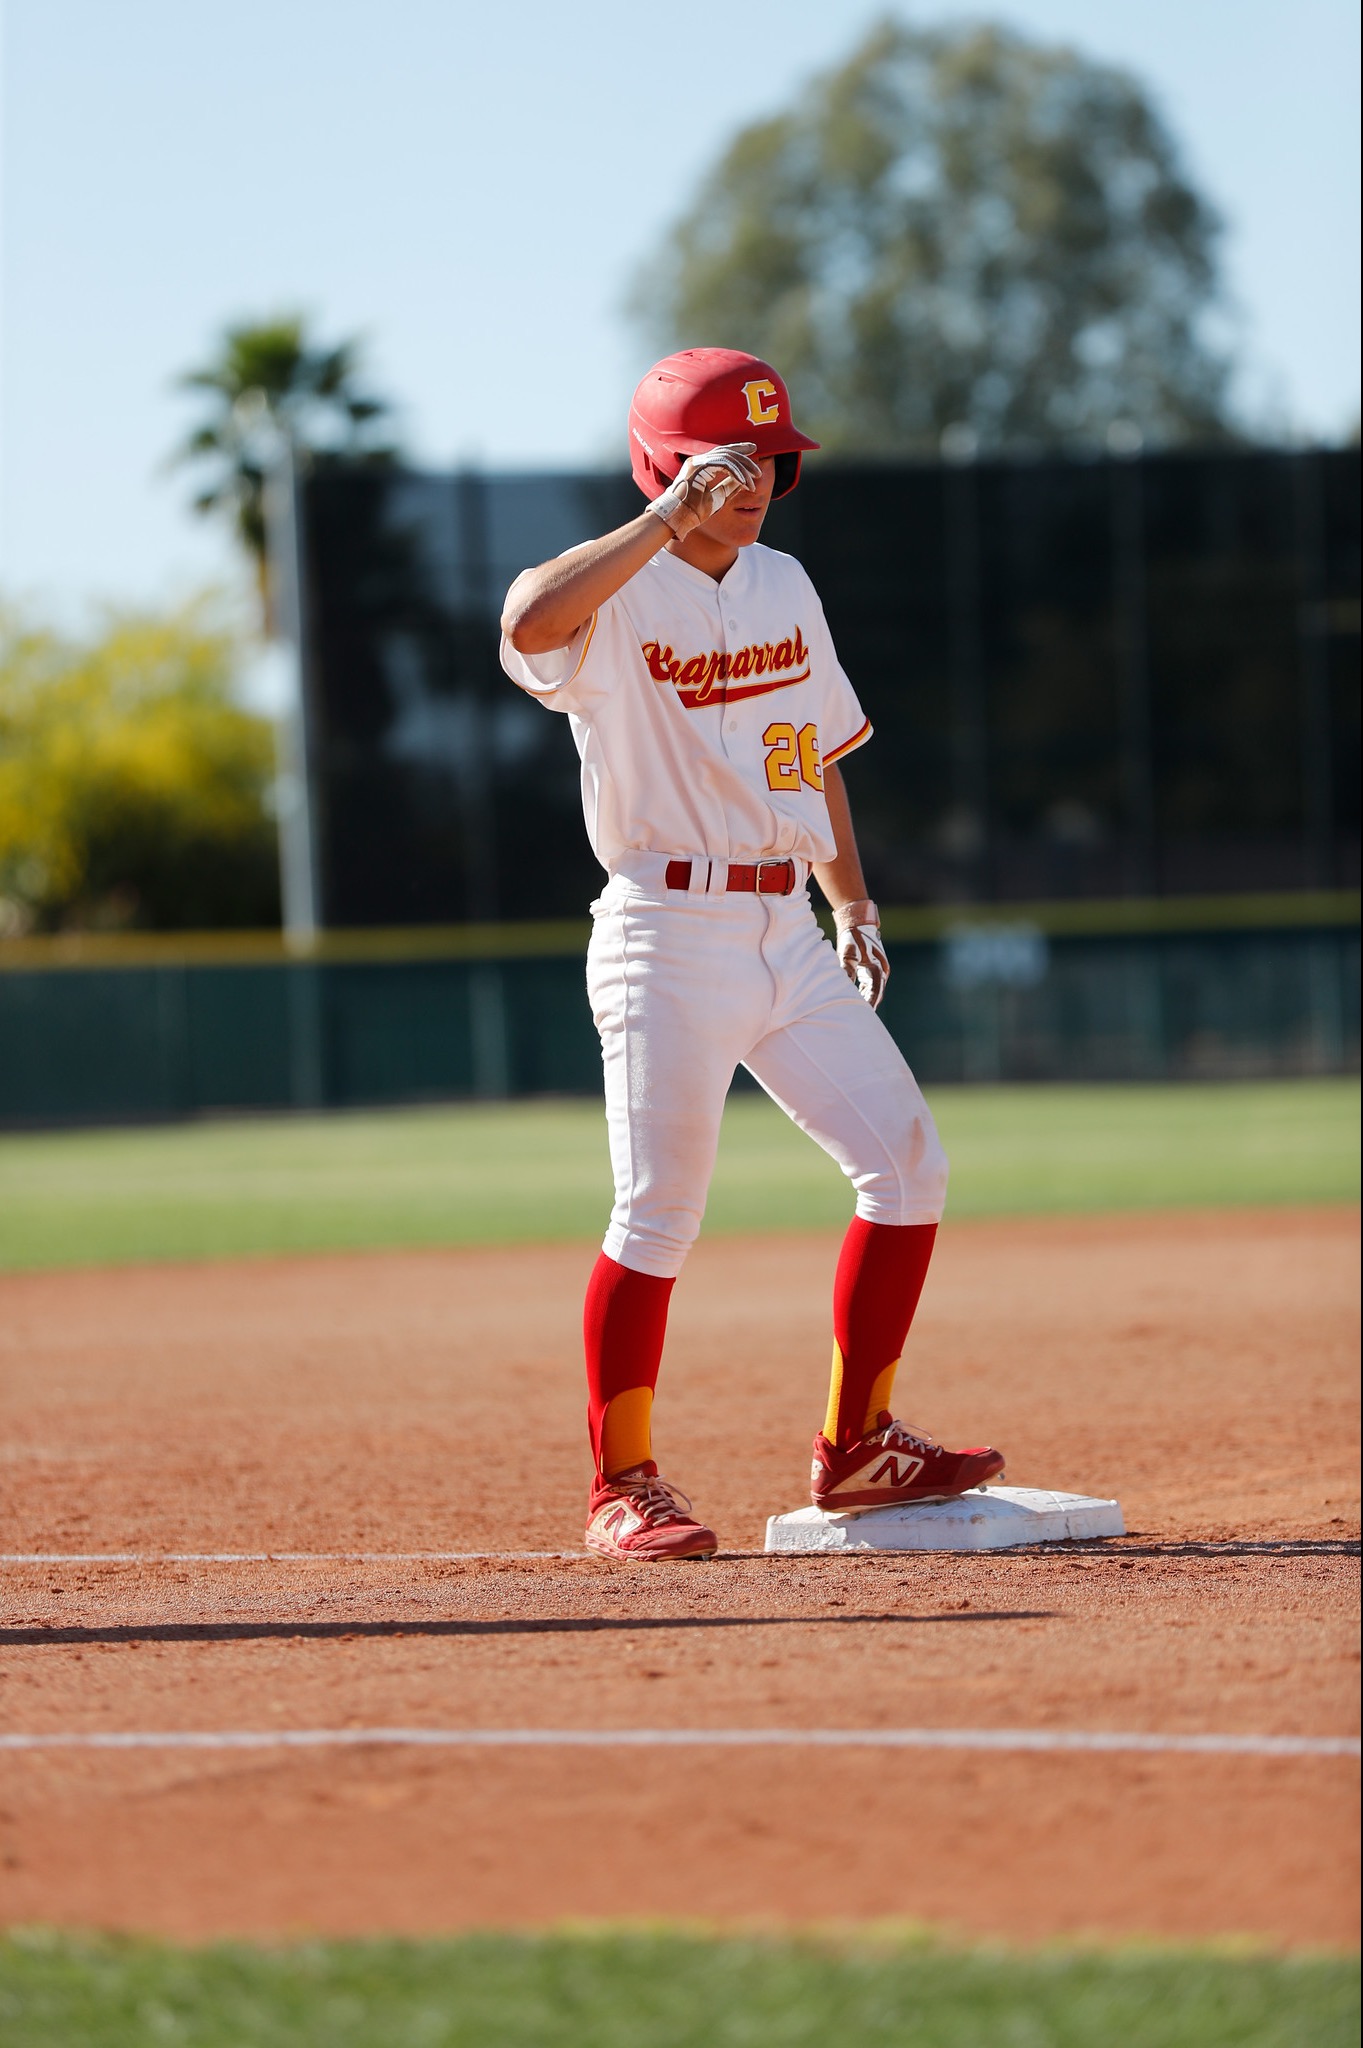 Check out the photos and videos of the baseball recruiting profile Ethan Hott